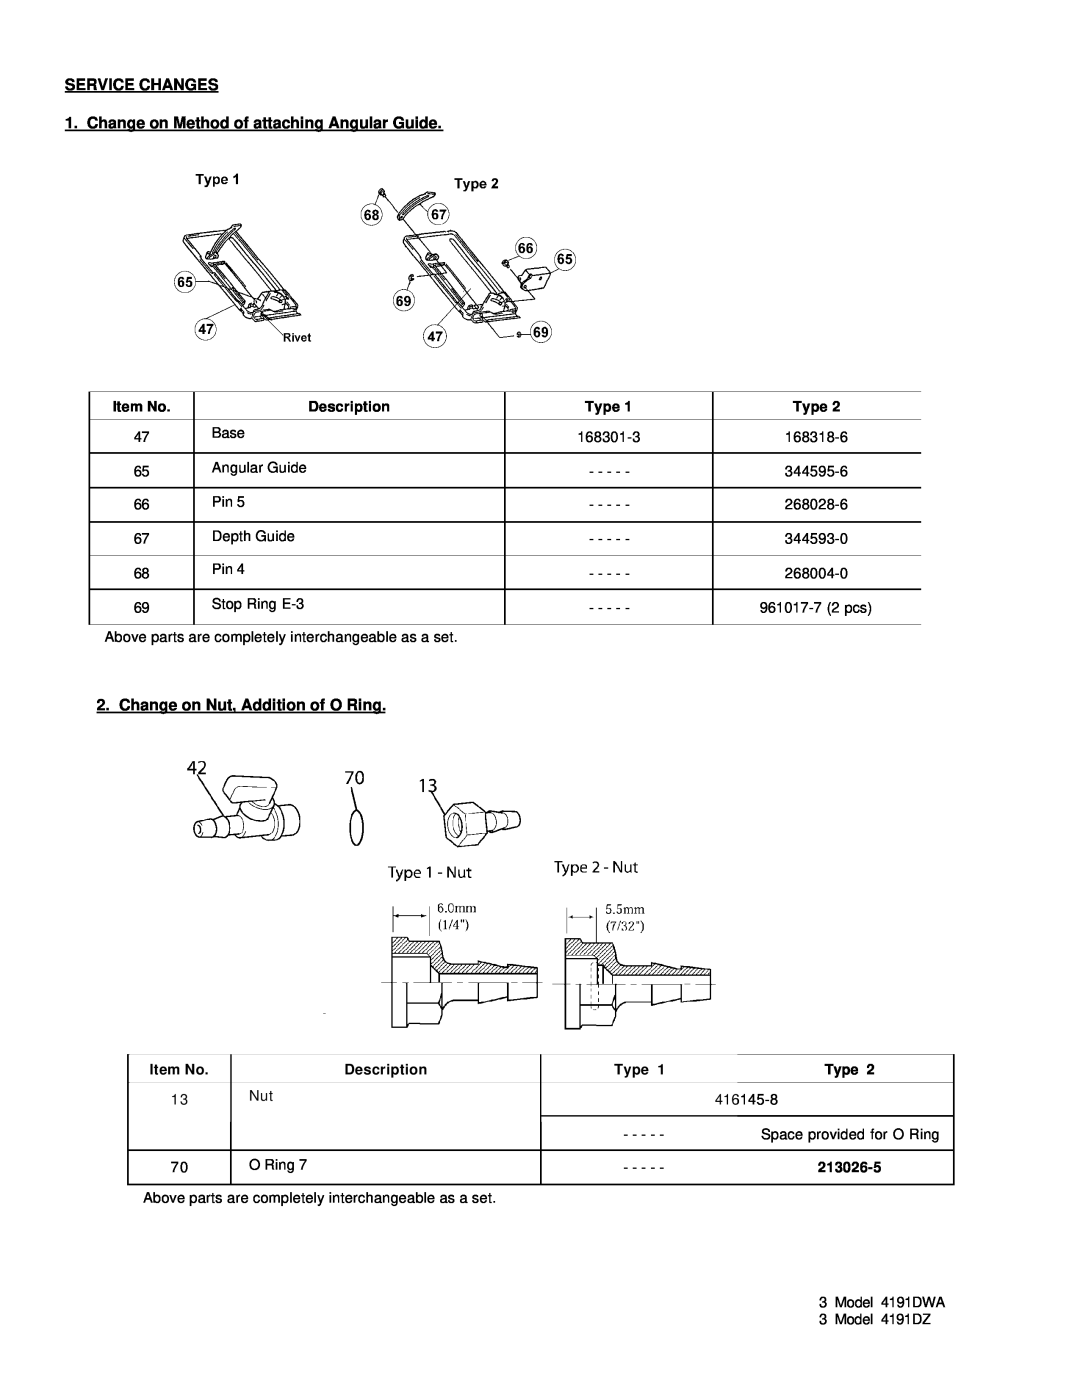 Makita 4191DZ manual Item No, Description, Type, 213026-5, SERVICE CHANGES 1. Change on Method of attaching Angular Guide 